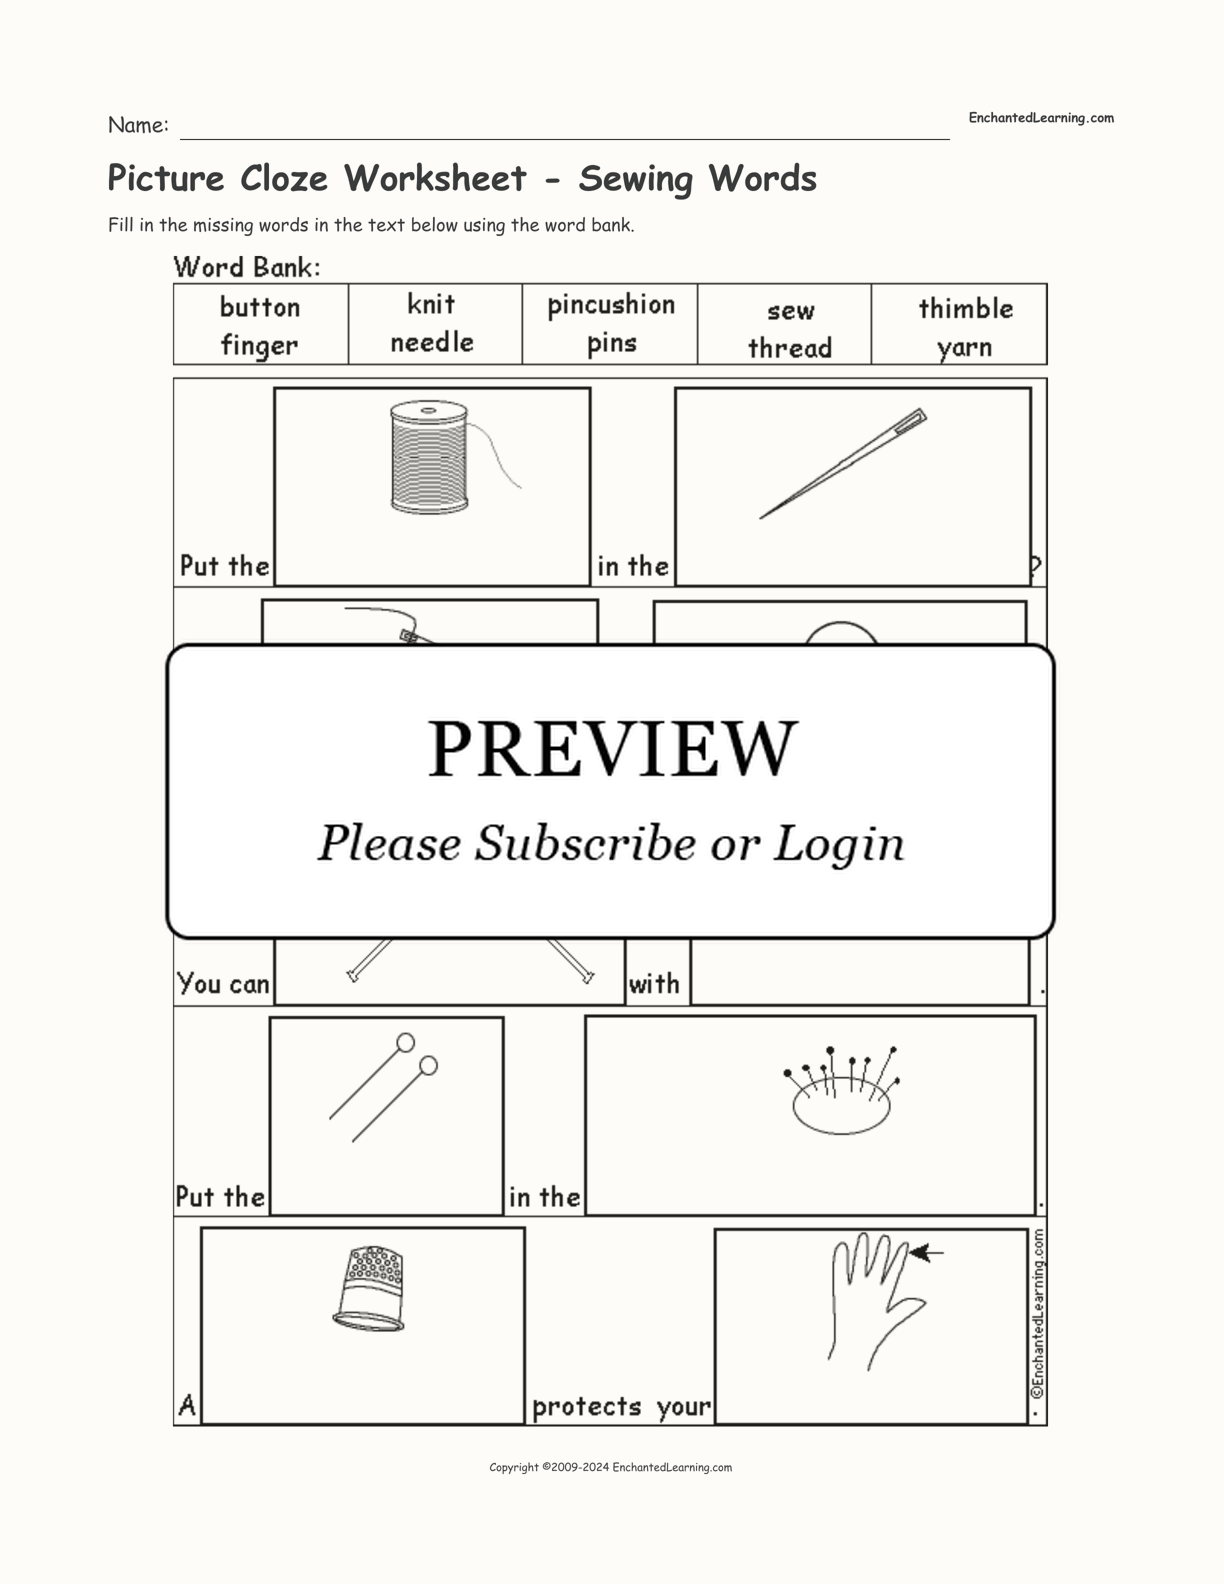 Picture Cloze Worksheet - Sewing Words interactive worksheet page 1